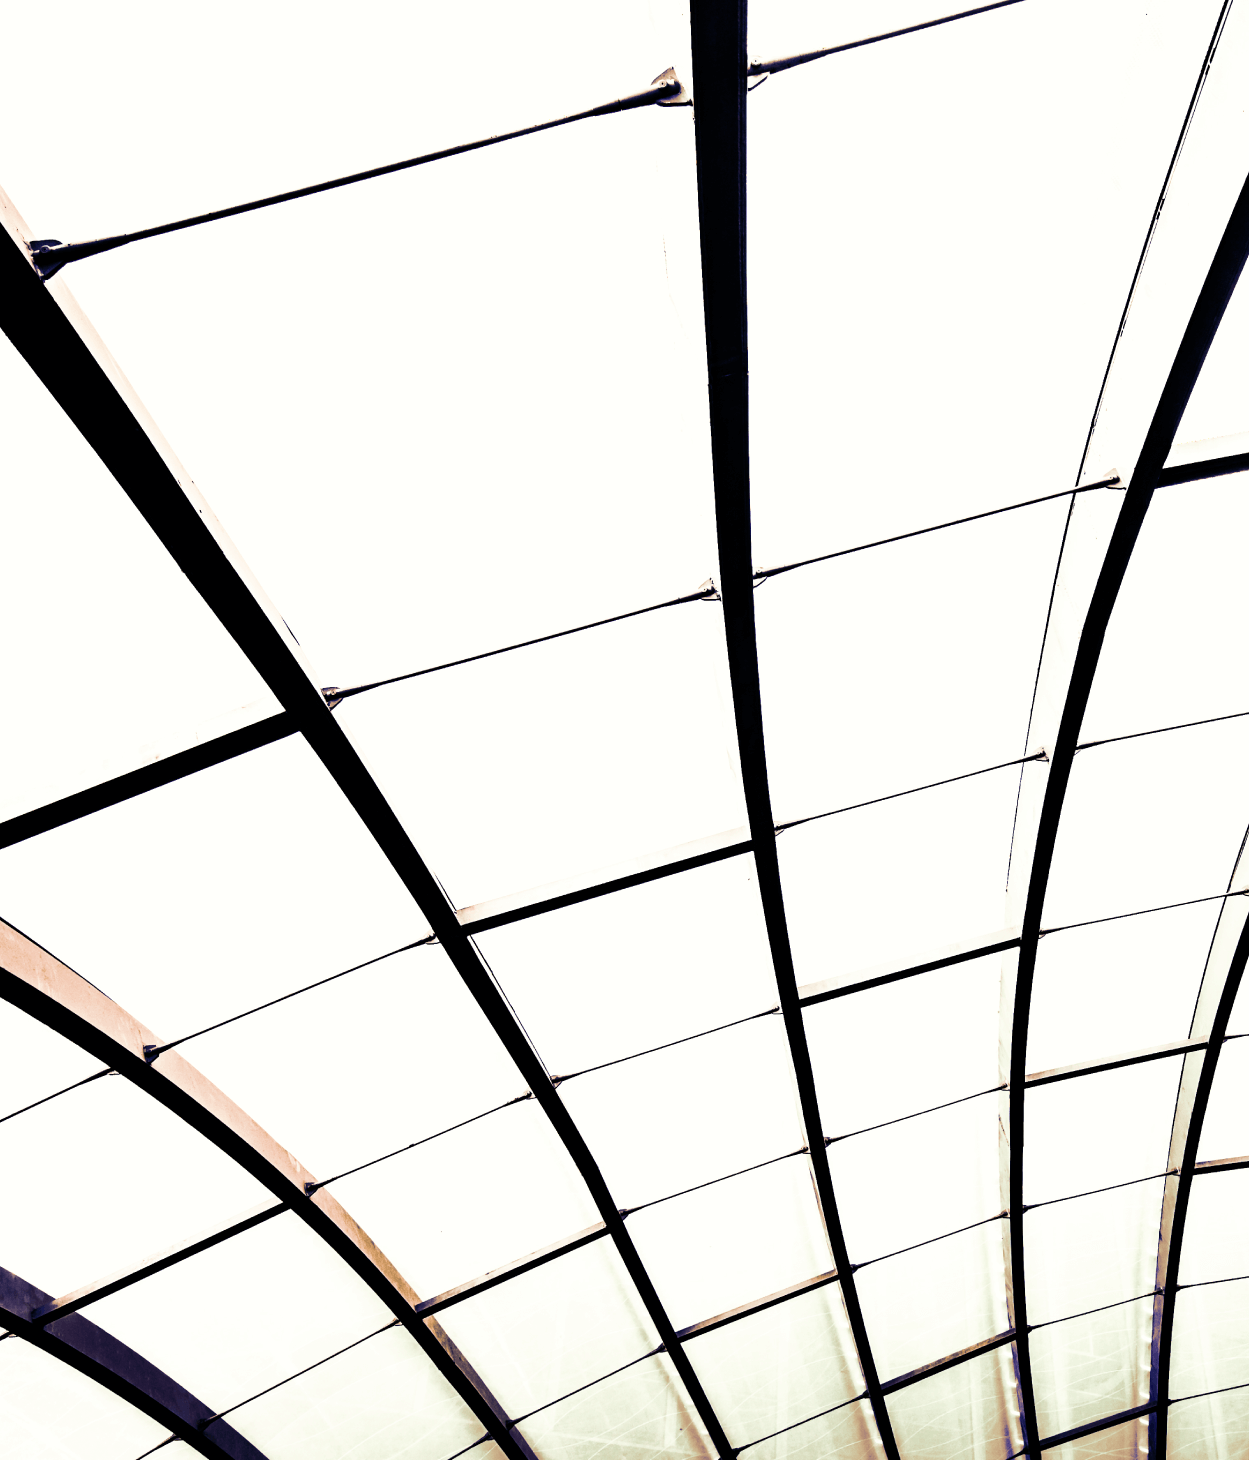 Photo from below a curved glass ceiling